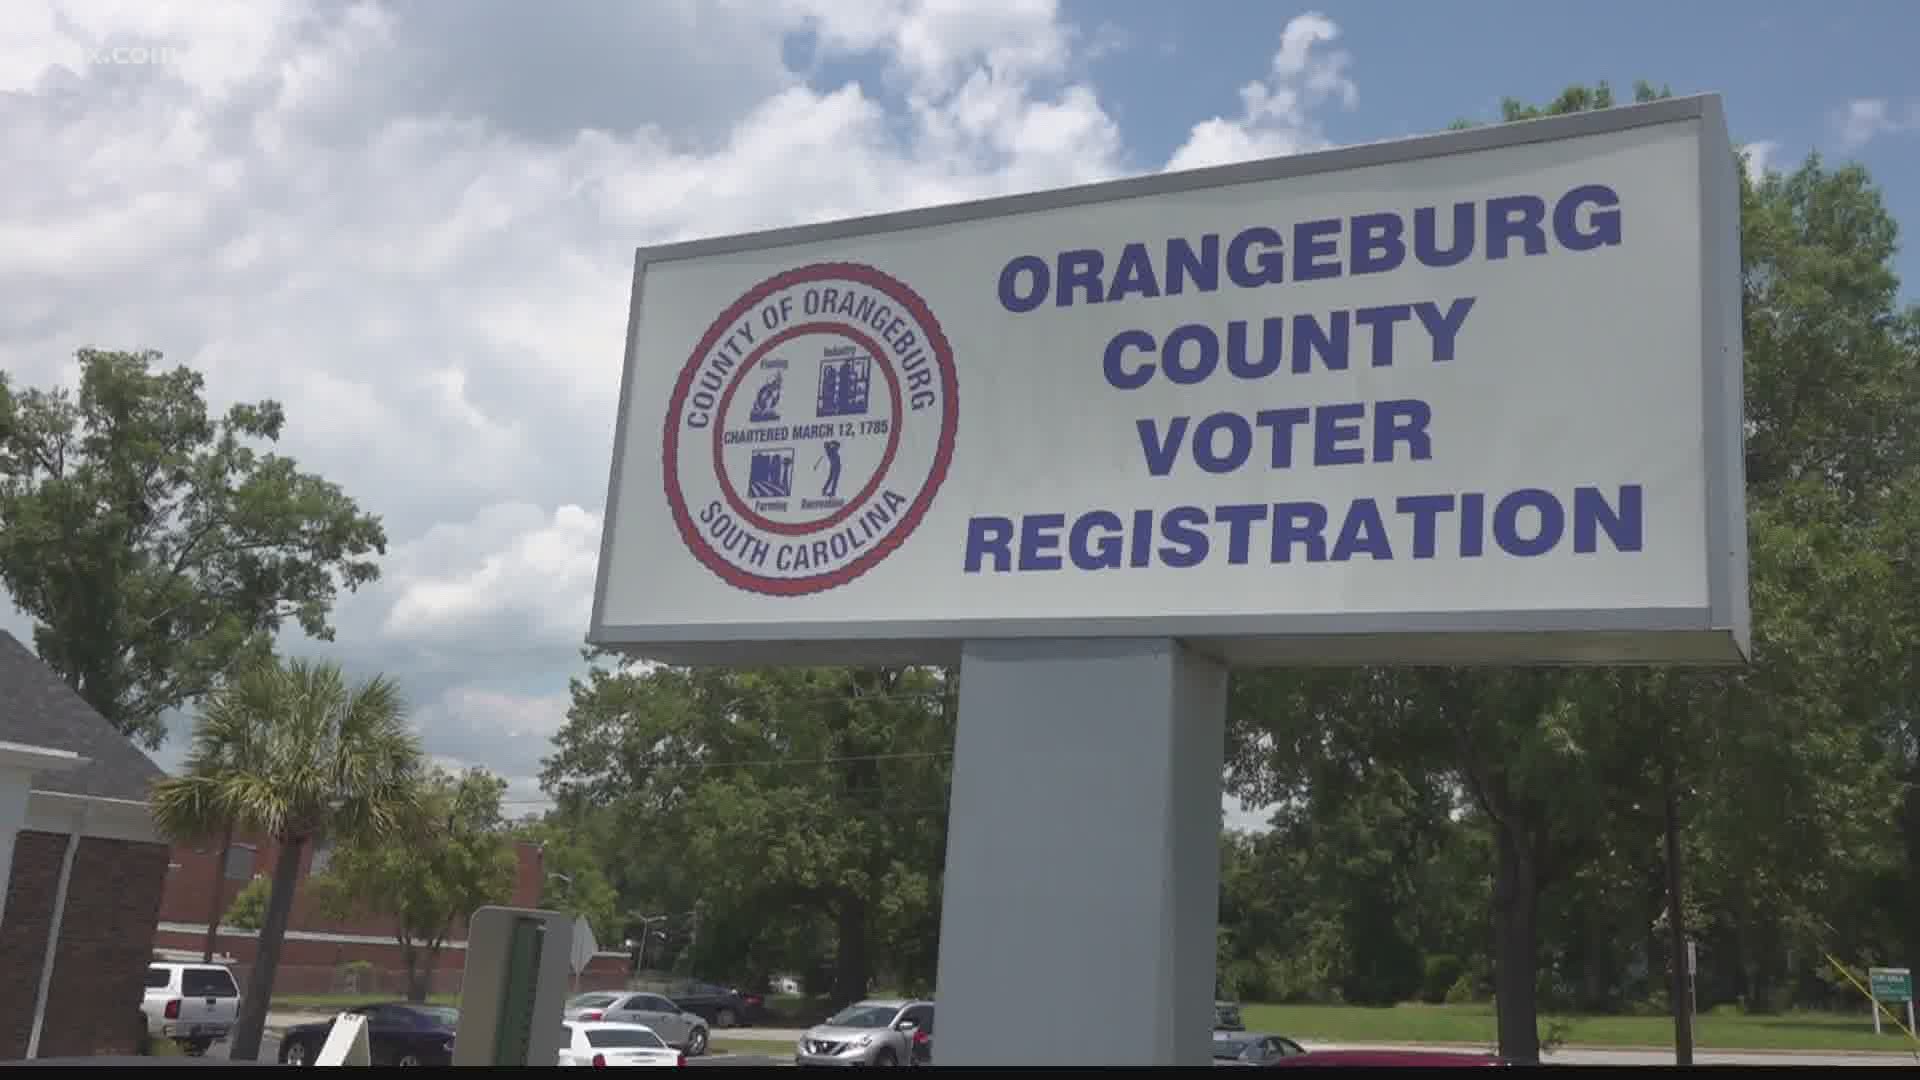 Orangeburg County is experiencing a few drop-outs of poll workers because of the pandemic, but election leaders say they're still prepared for the crowds.